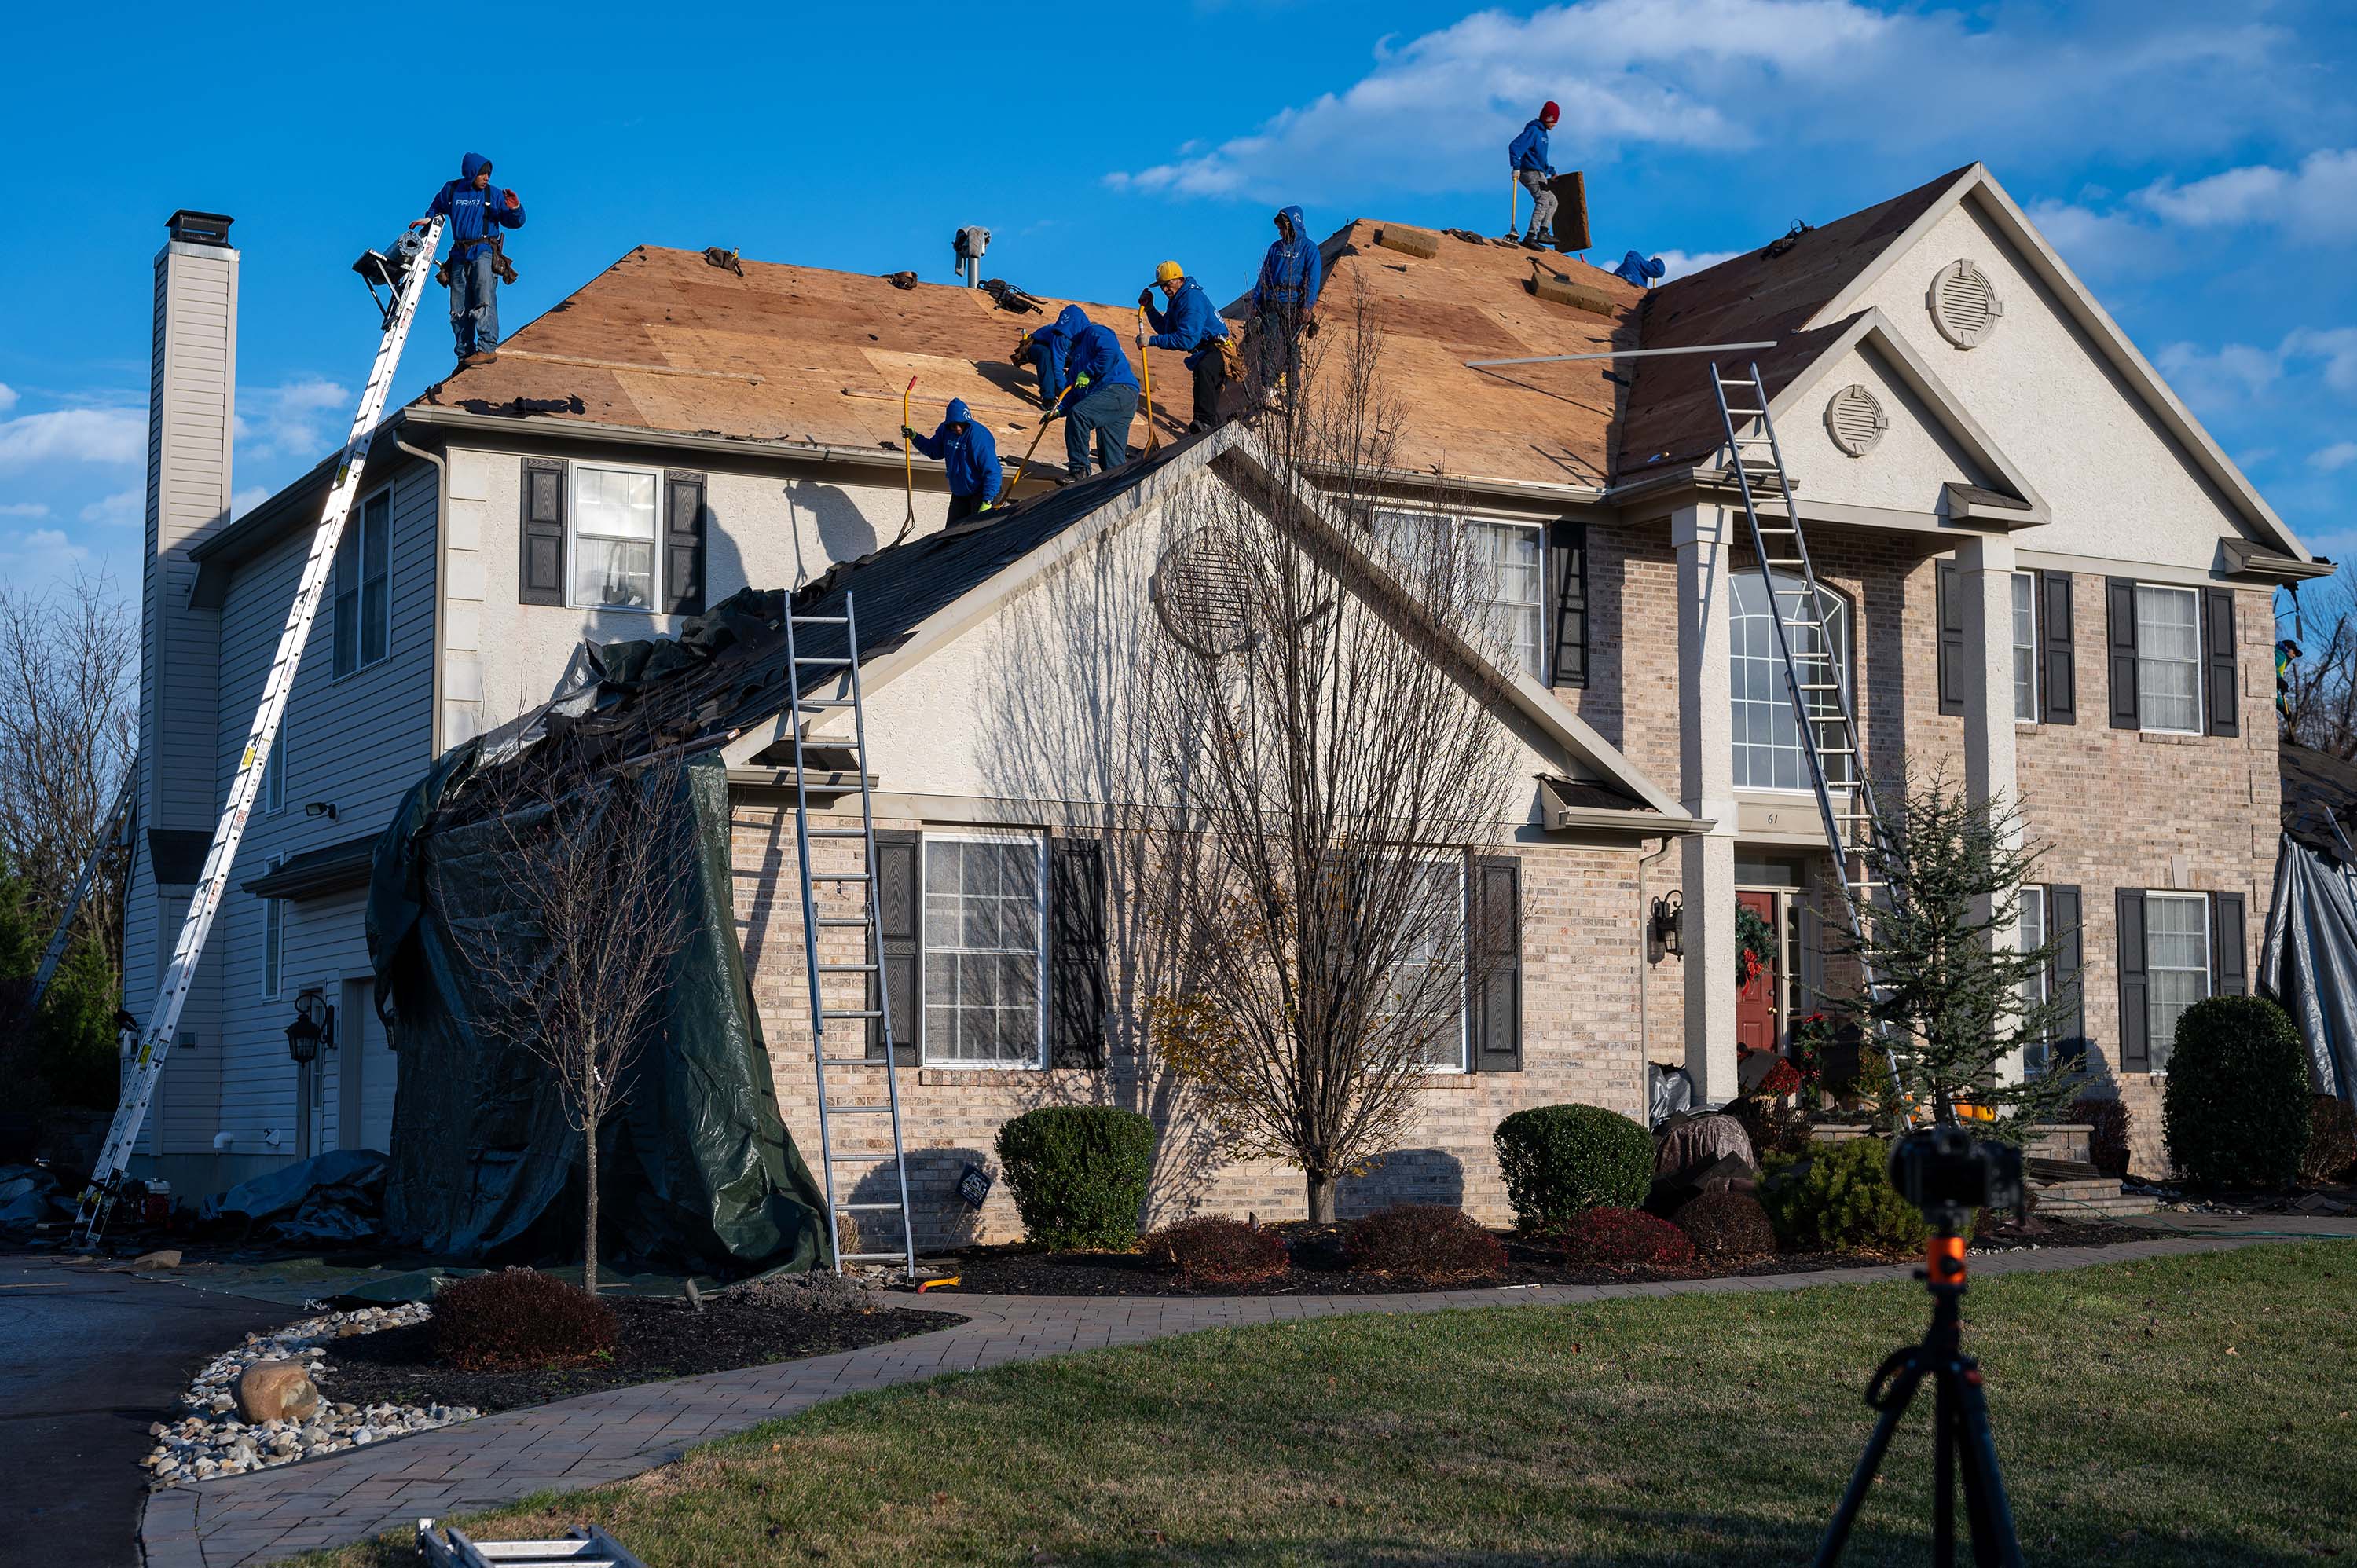 Roofing repair company - residential roofing contractors in Browns Mills (large image)